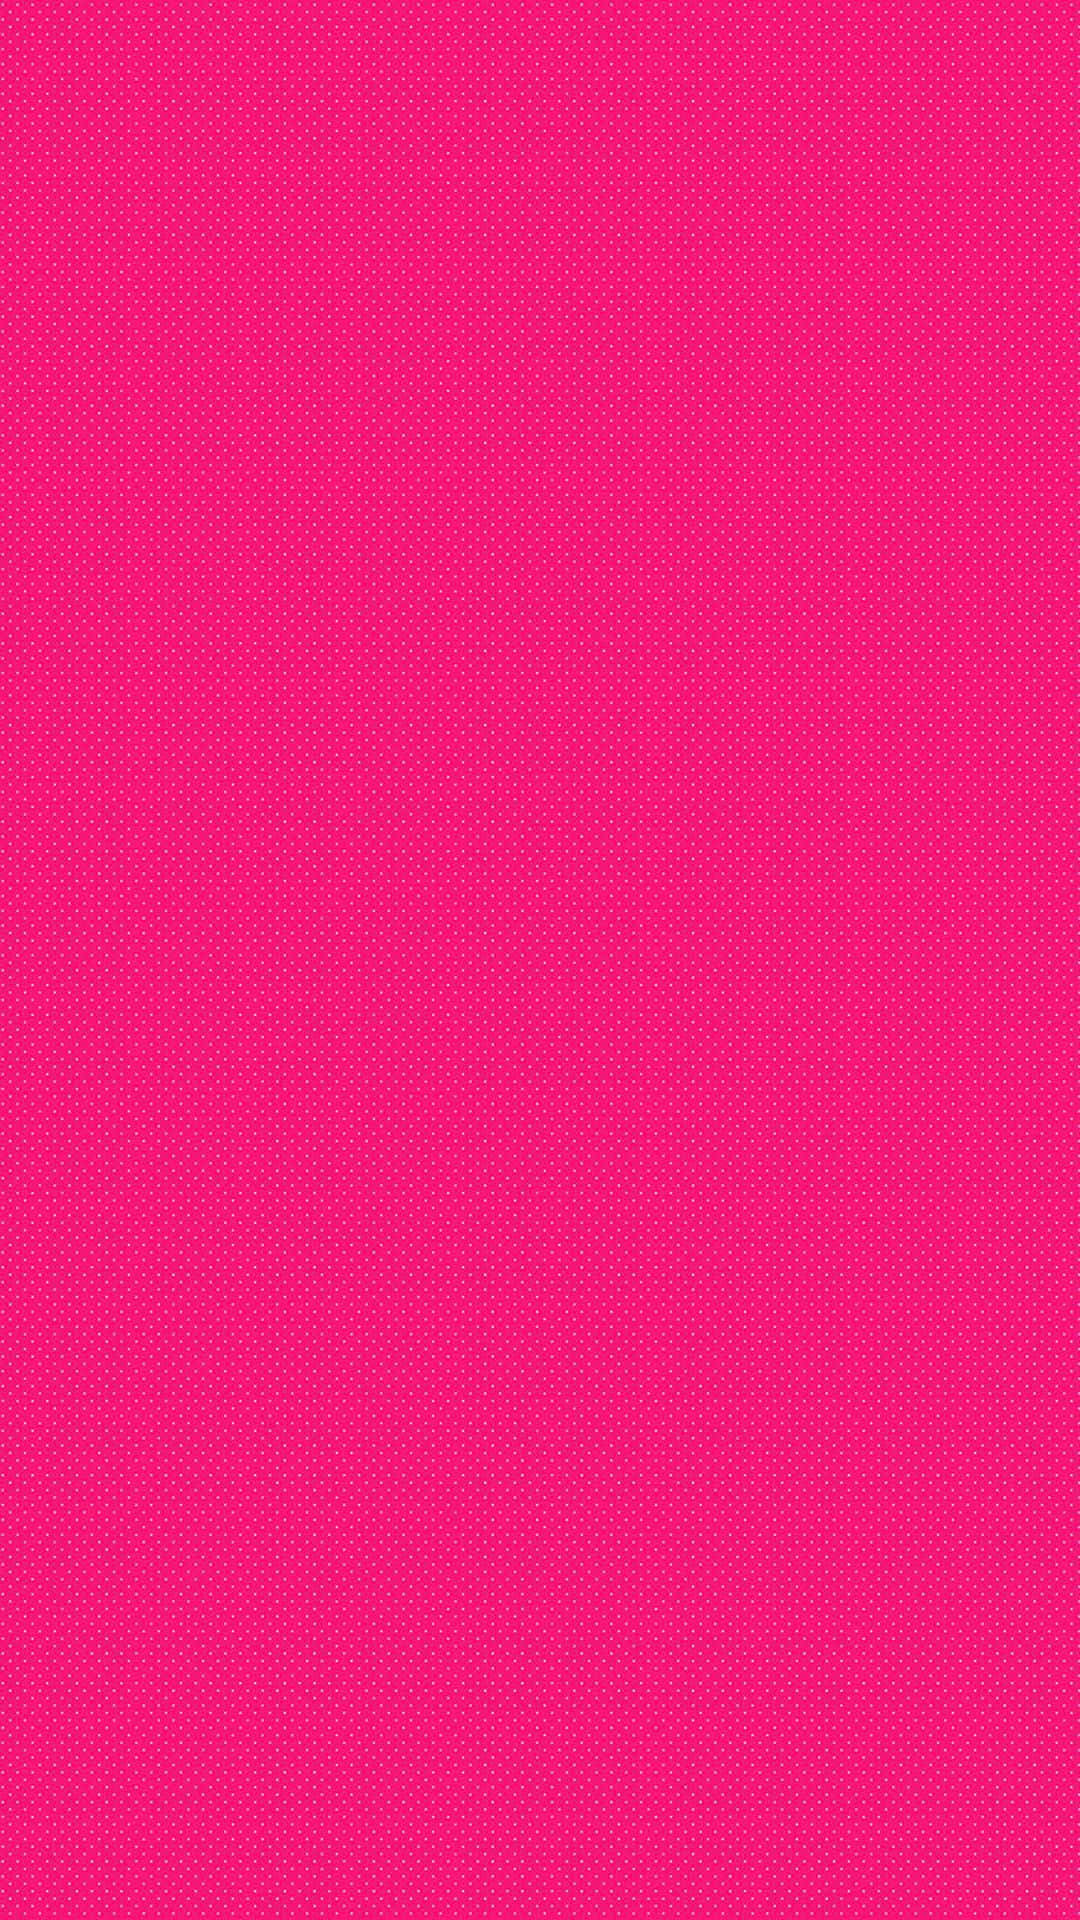 Hot Pink Solid Color Iphone Wallpaper